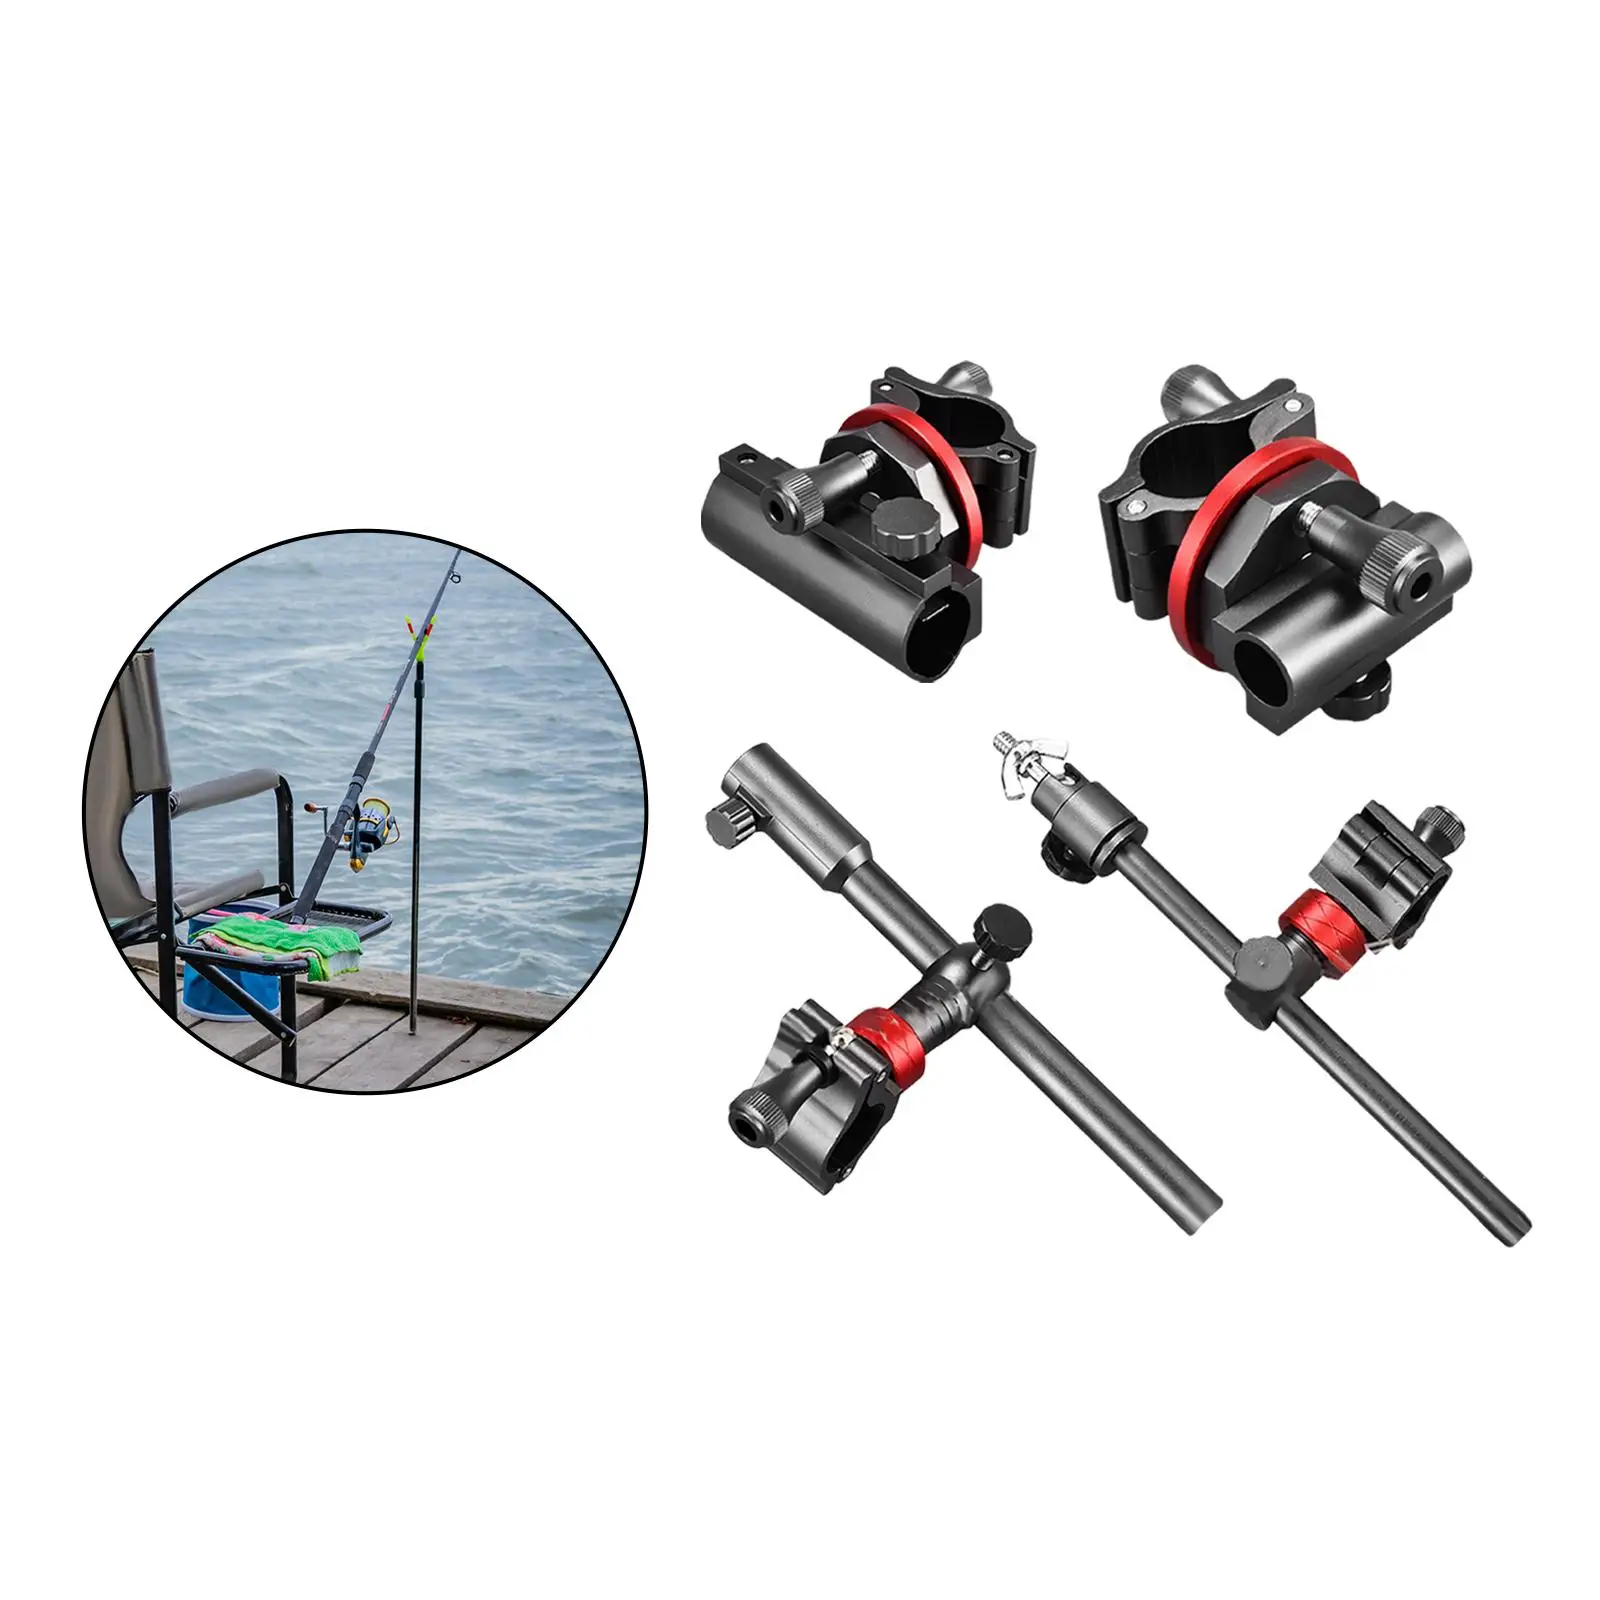 Fishing Chair Accessories Durable Stainless Bait Box Holder for Outdoors